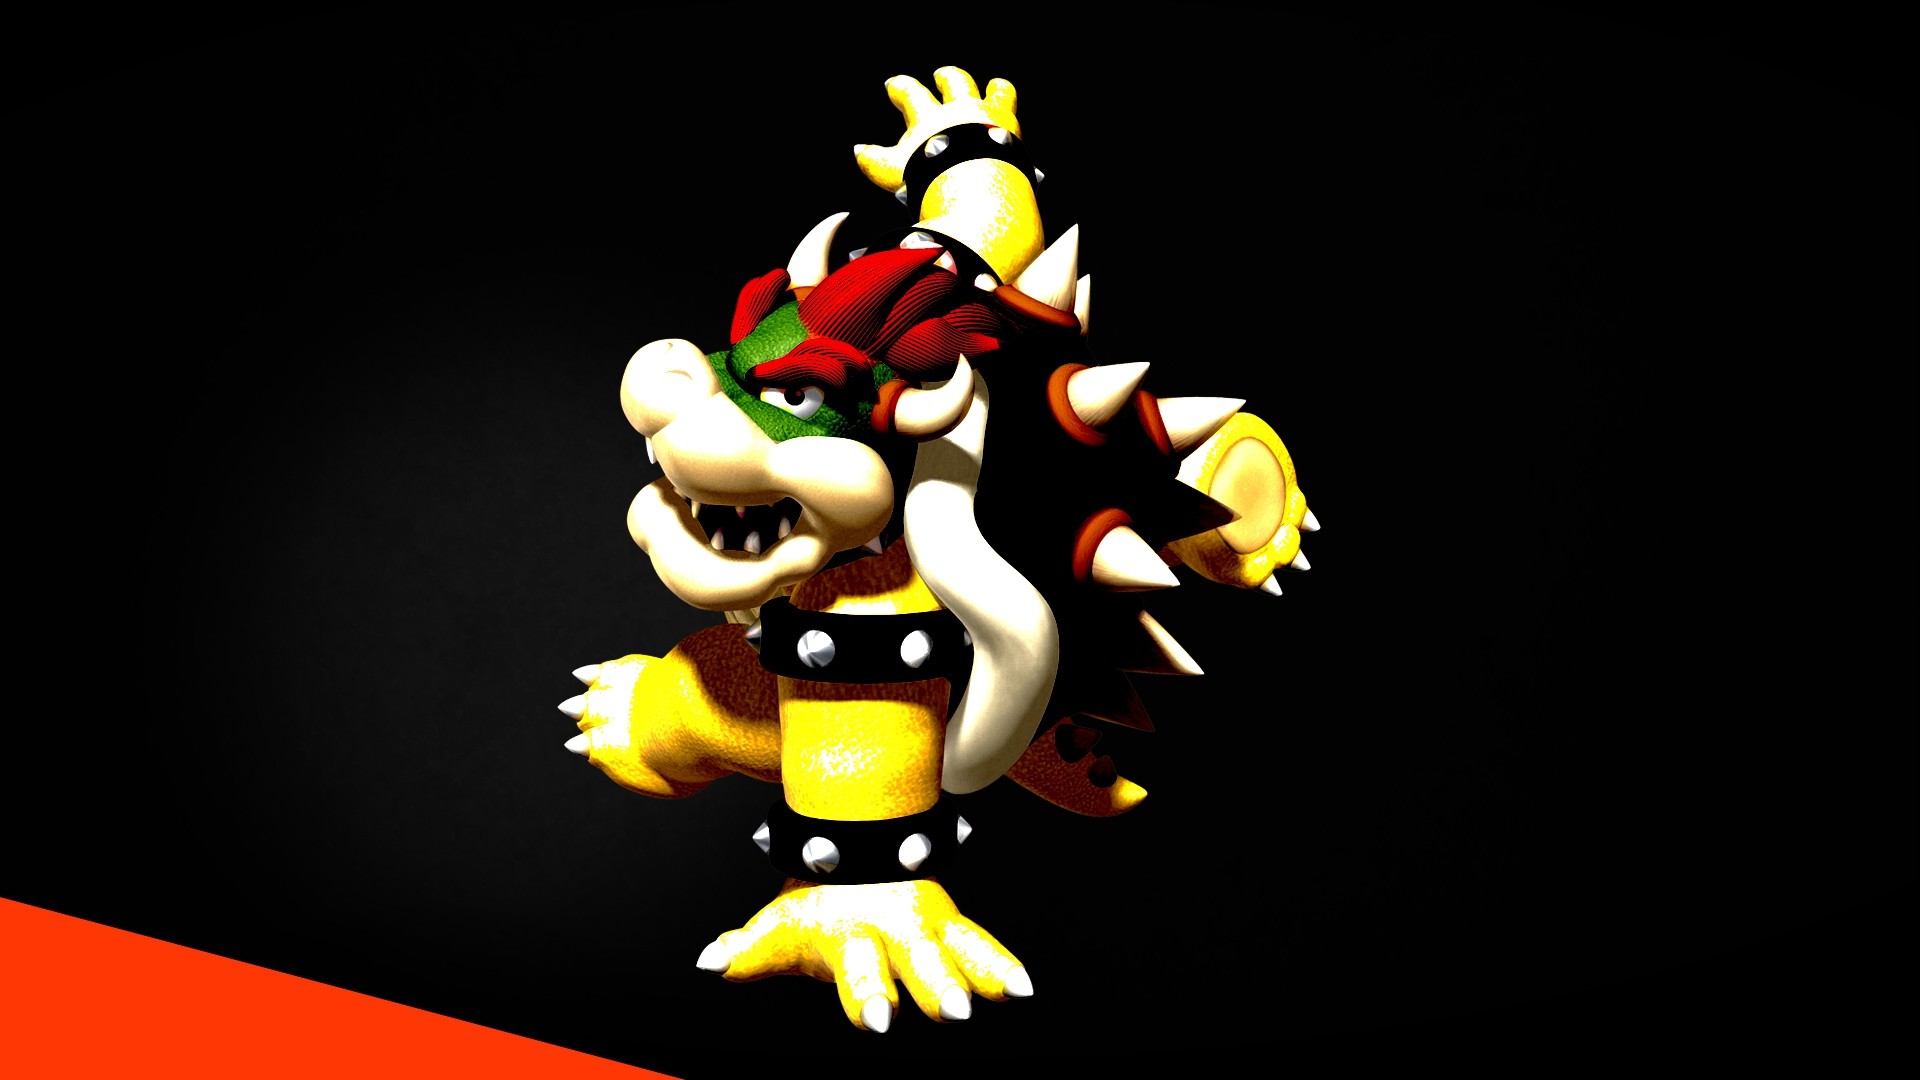 1920x1080 ... Bowser Wallpaper For Desktop, Laptop and Mobiles. Here You Can Download  More than 5 Million Photography collections Uploaded By Users.